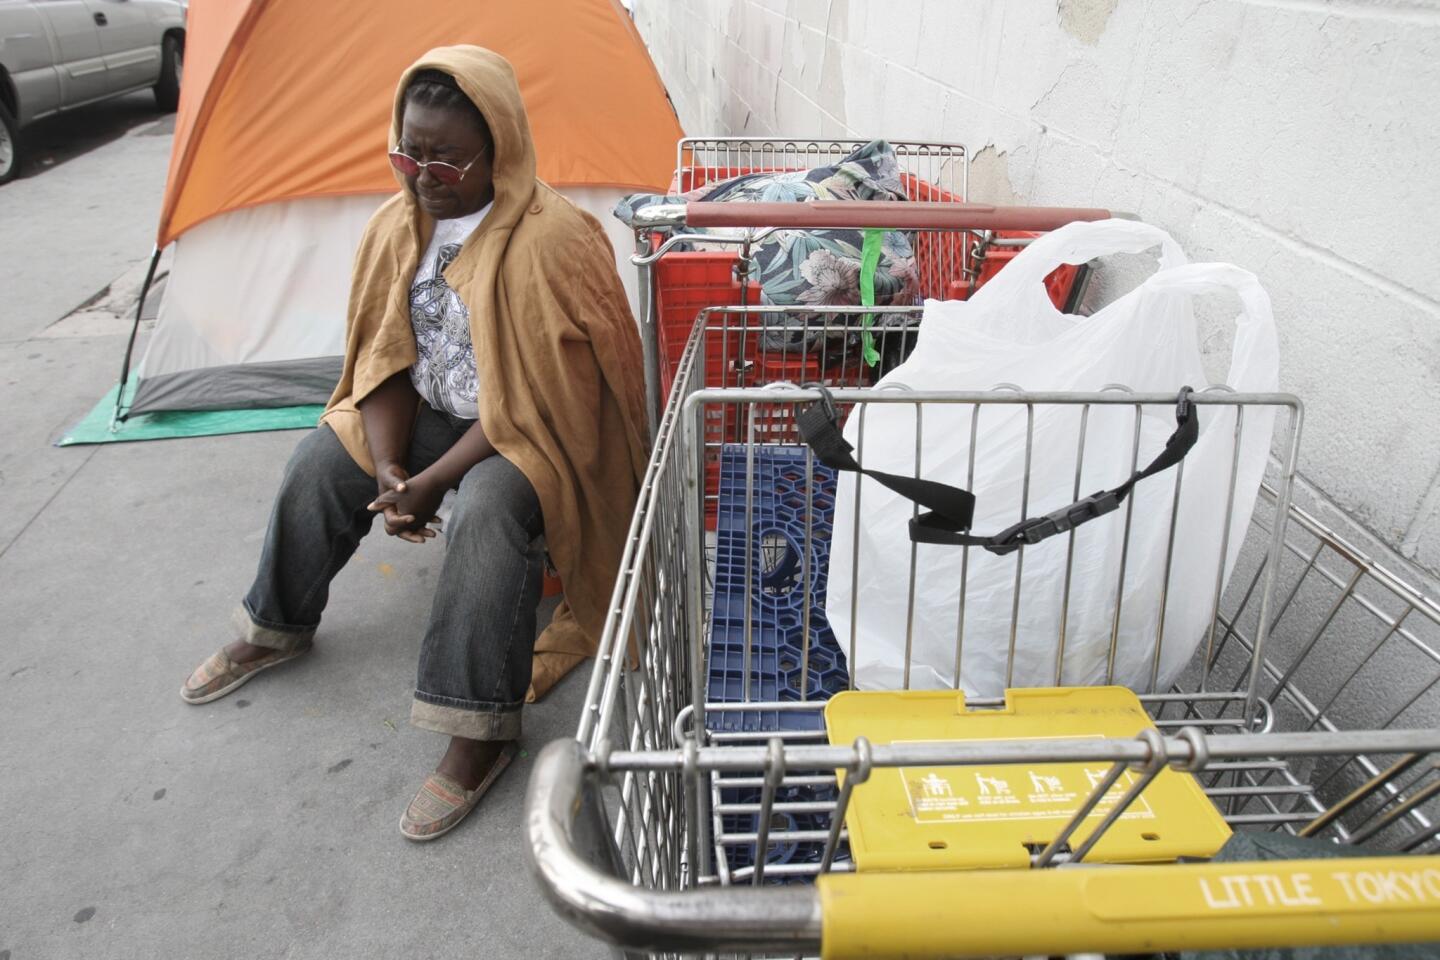 Annie Moody sits next to her tent on Towne Avenue at 6th Street on in the skid row area of Los Angeles.